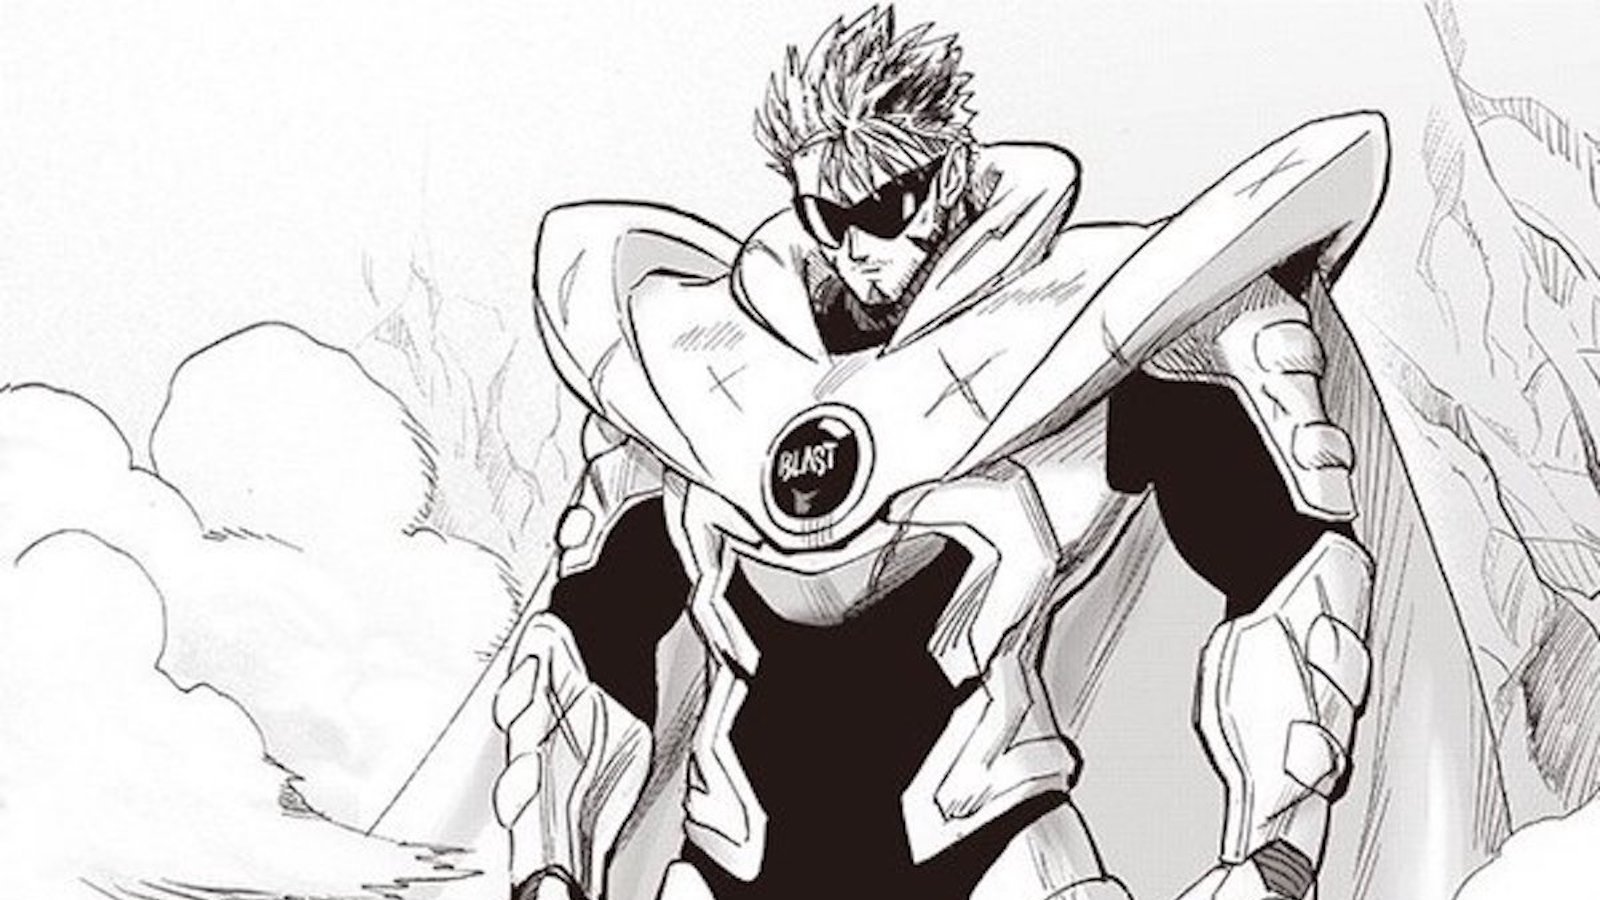 Who is Blast in One Punch Man? - Quora